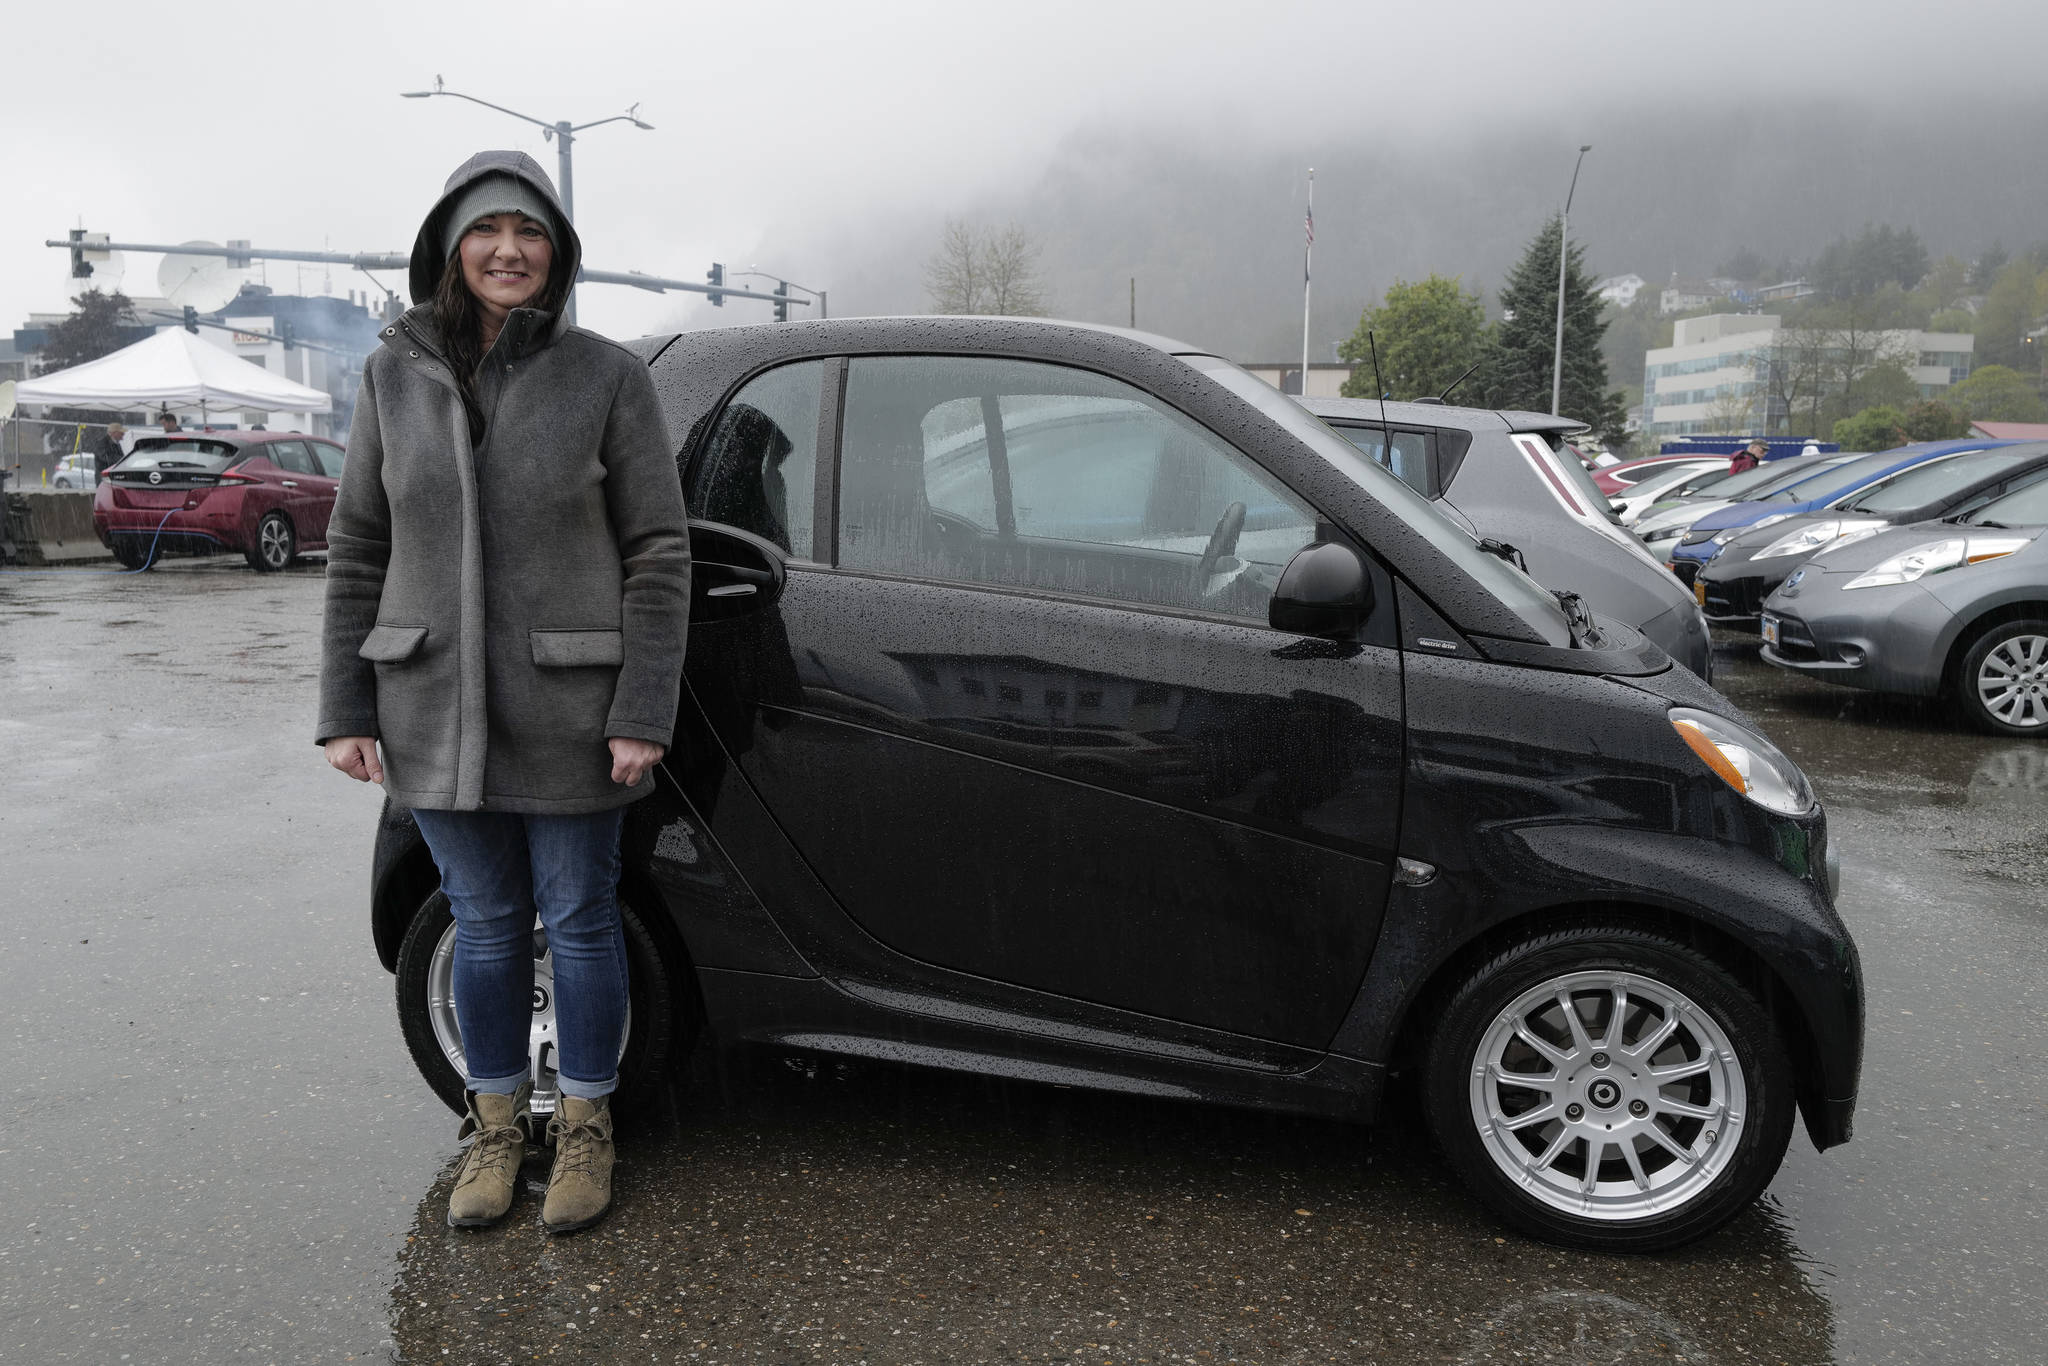 Nikki Hogan poses with her 2014 Electric Smart Car as Juneau residents meet for the Sixth Annual Electric Vehicle Juneau Roundup on Saturday, Sept. 21, 2019. (Michael Penn | Juneau Empire)